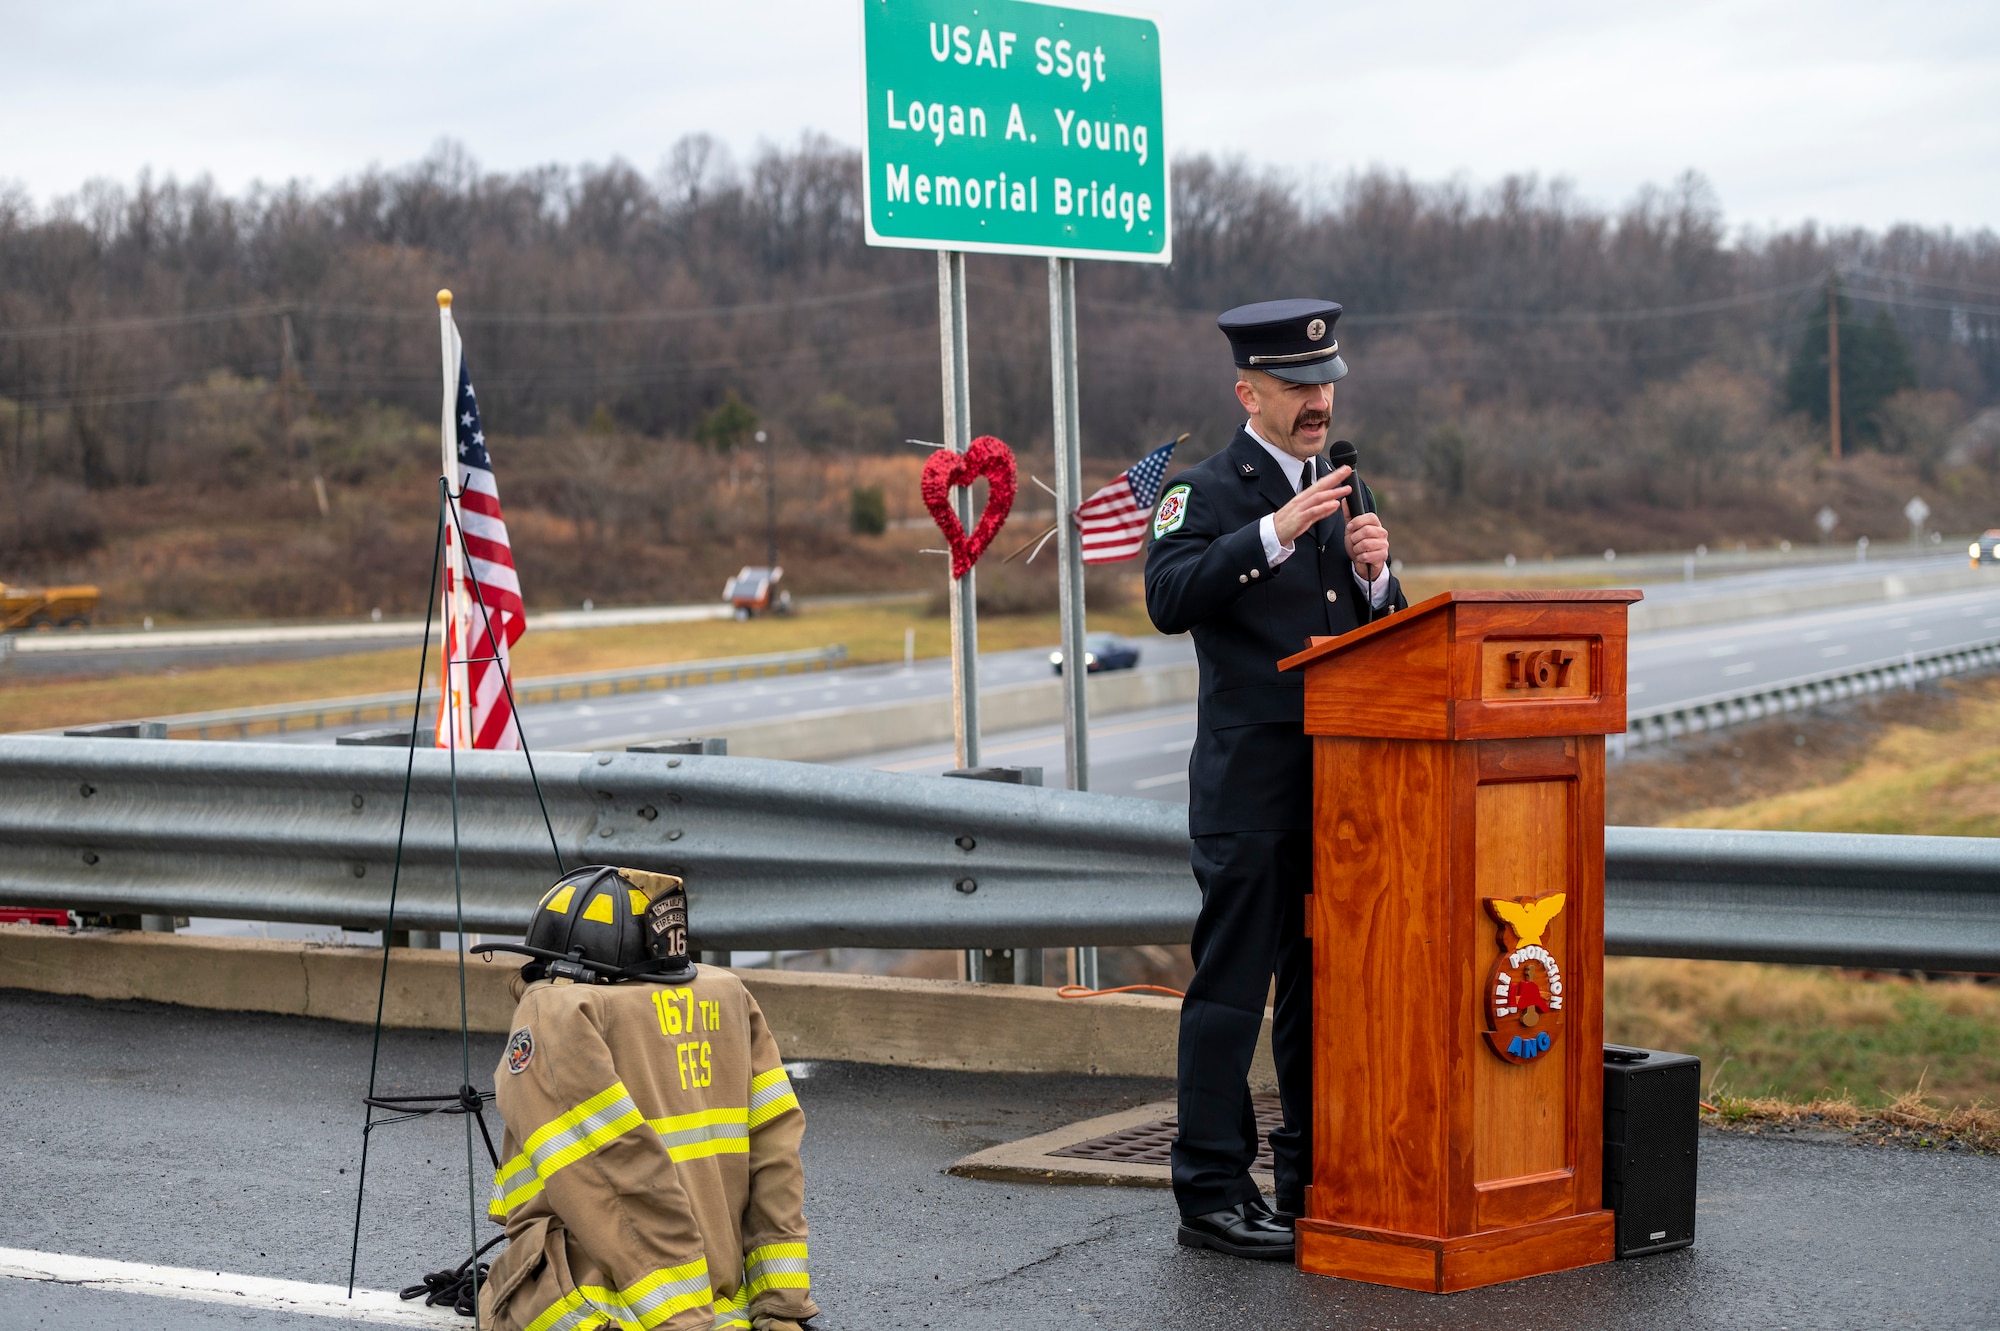 Firefighter Captain Bradley Wright, South Berkeley County Station 20, speaks at the bridge dedication ceremony for the U.S. Air Force Staff Sgt. Logan A. Young Memorial Bridge, Dec. 3, 2022. Wright drafted the resolution the led to the bridge renaming.